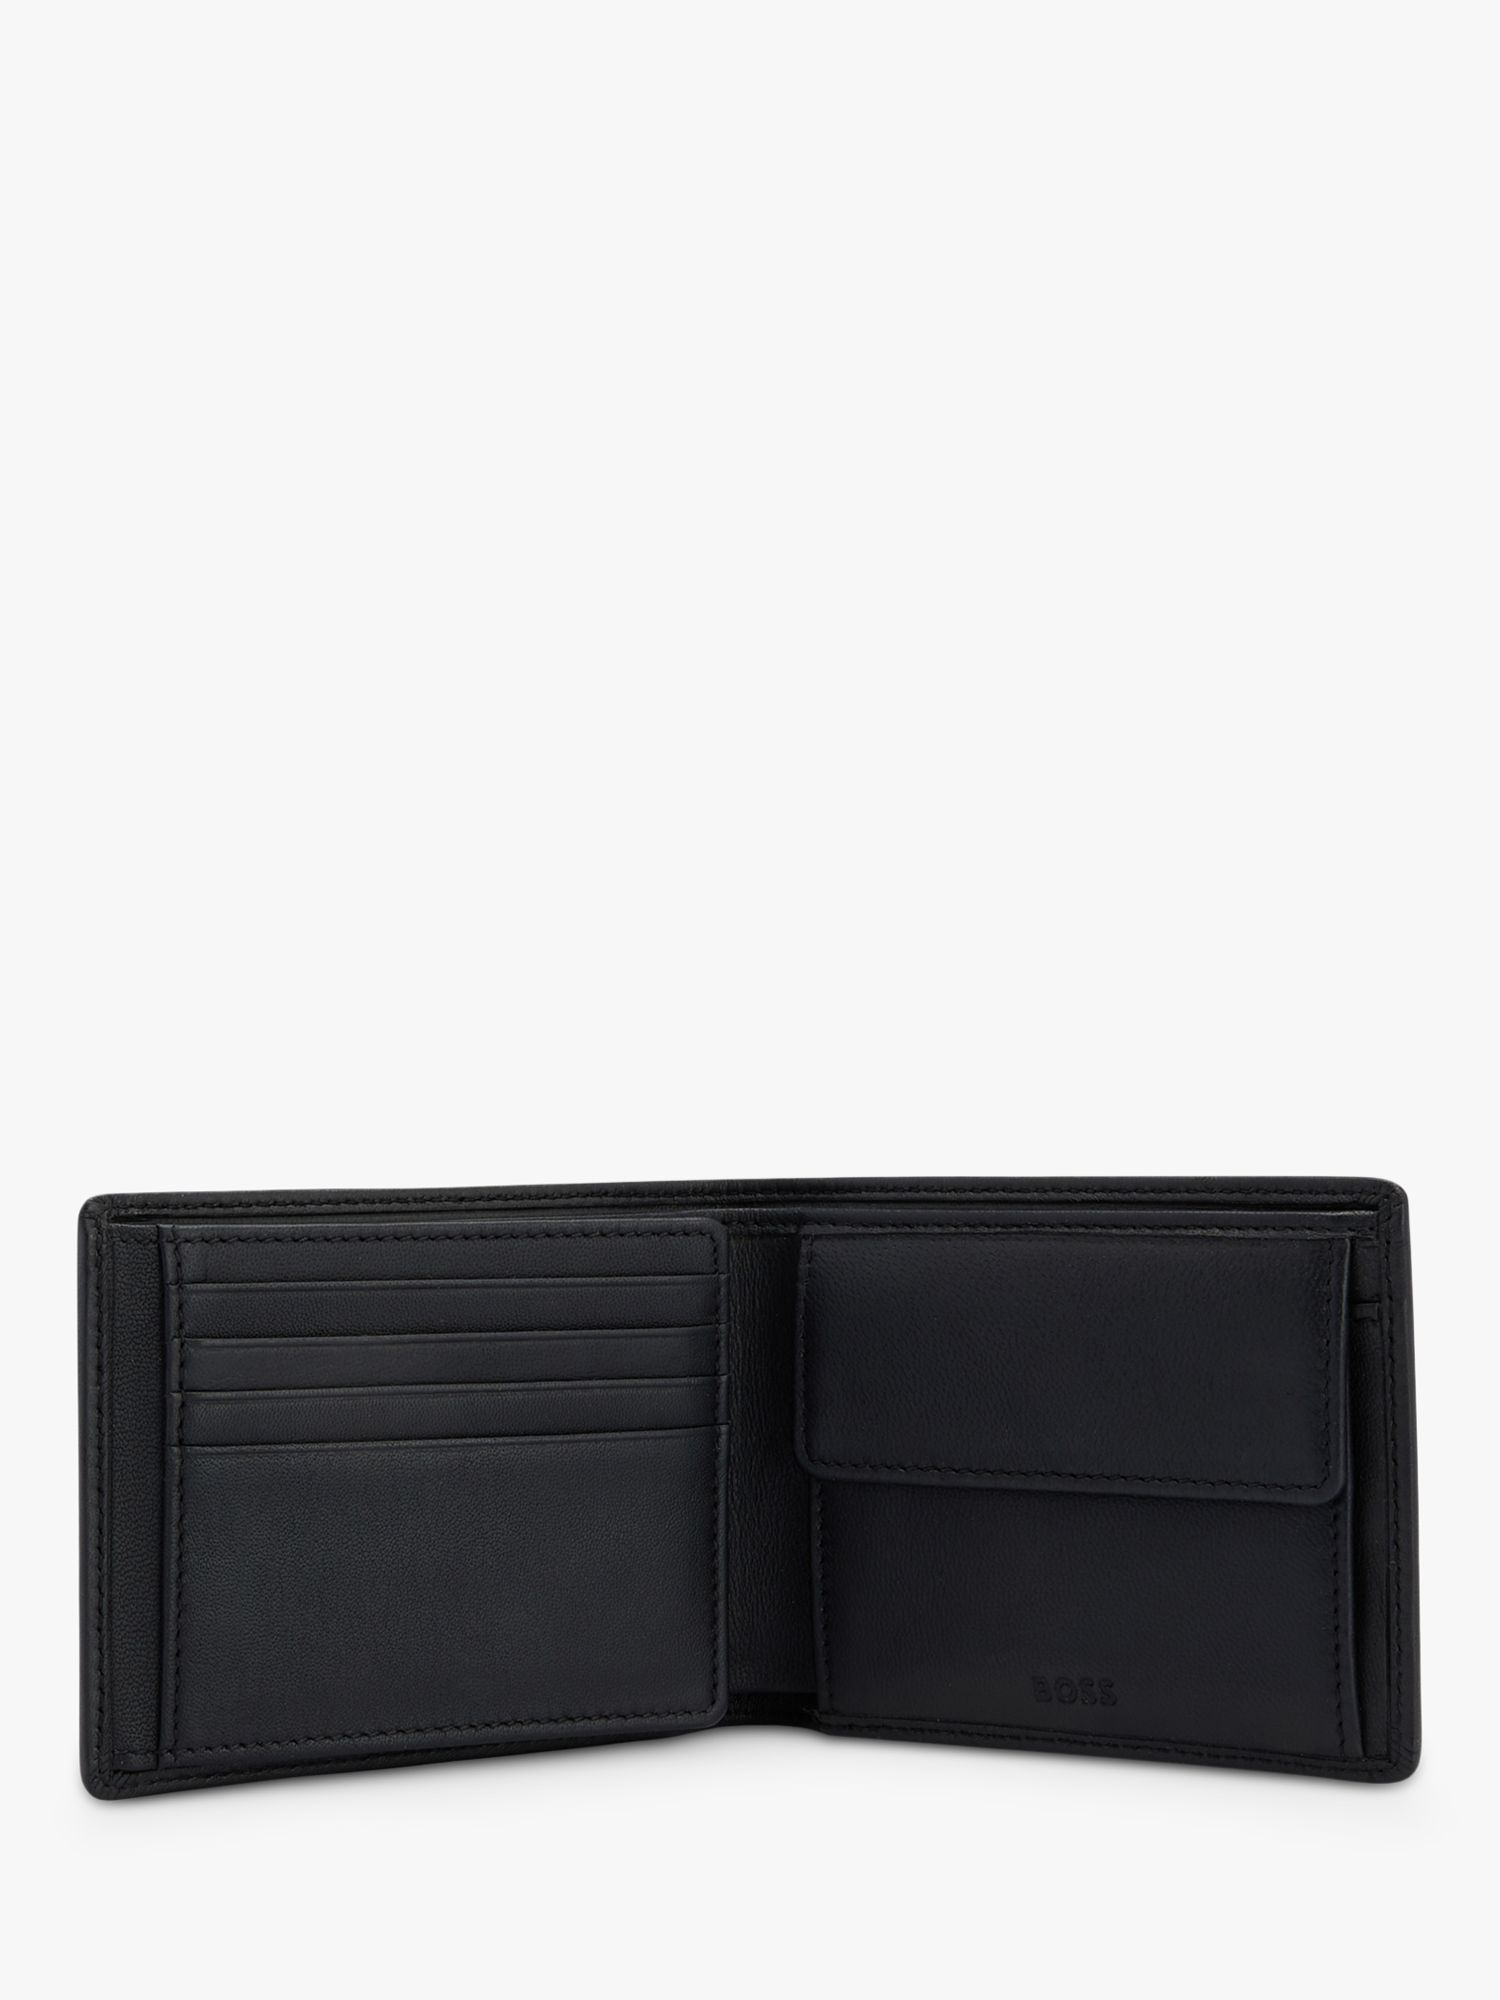 Buy BOSS Arezzo Leather Wallet, Black Online at johnlewis.com